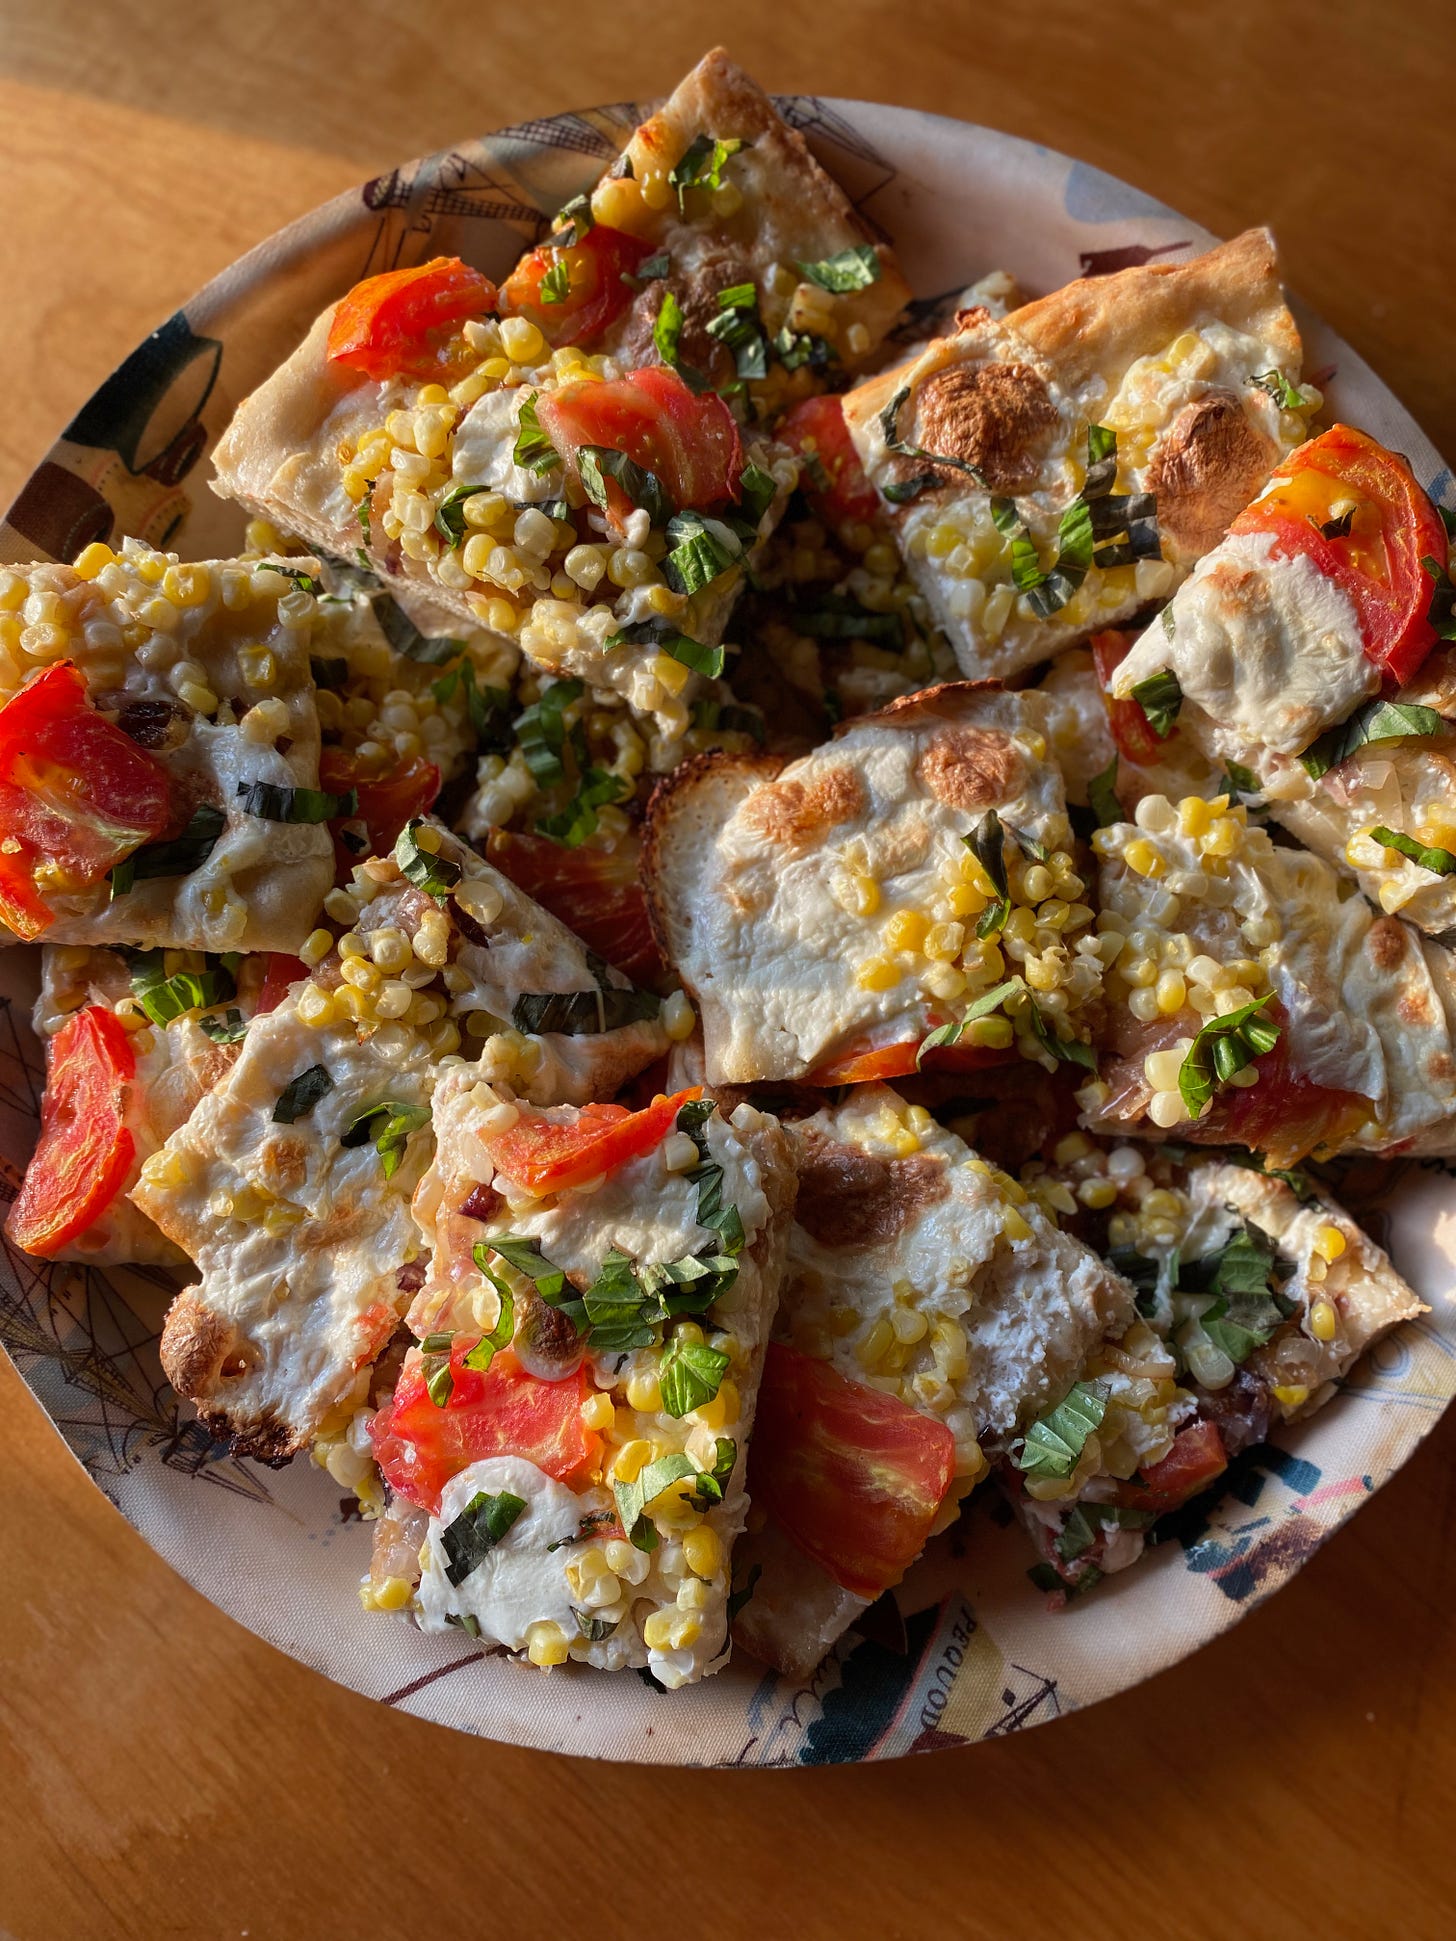 A plate of rectangular slices of pizza, topped with corn, tomatoes, and basil, in the evening sun.